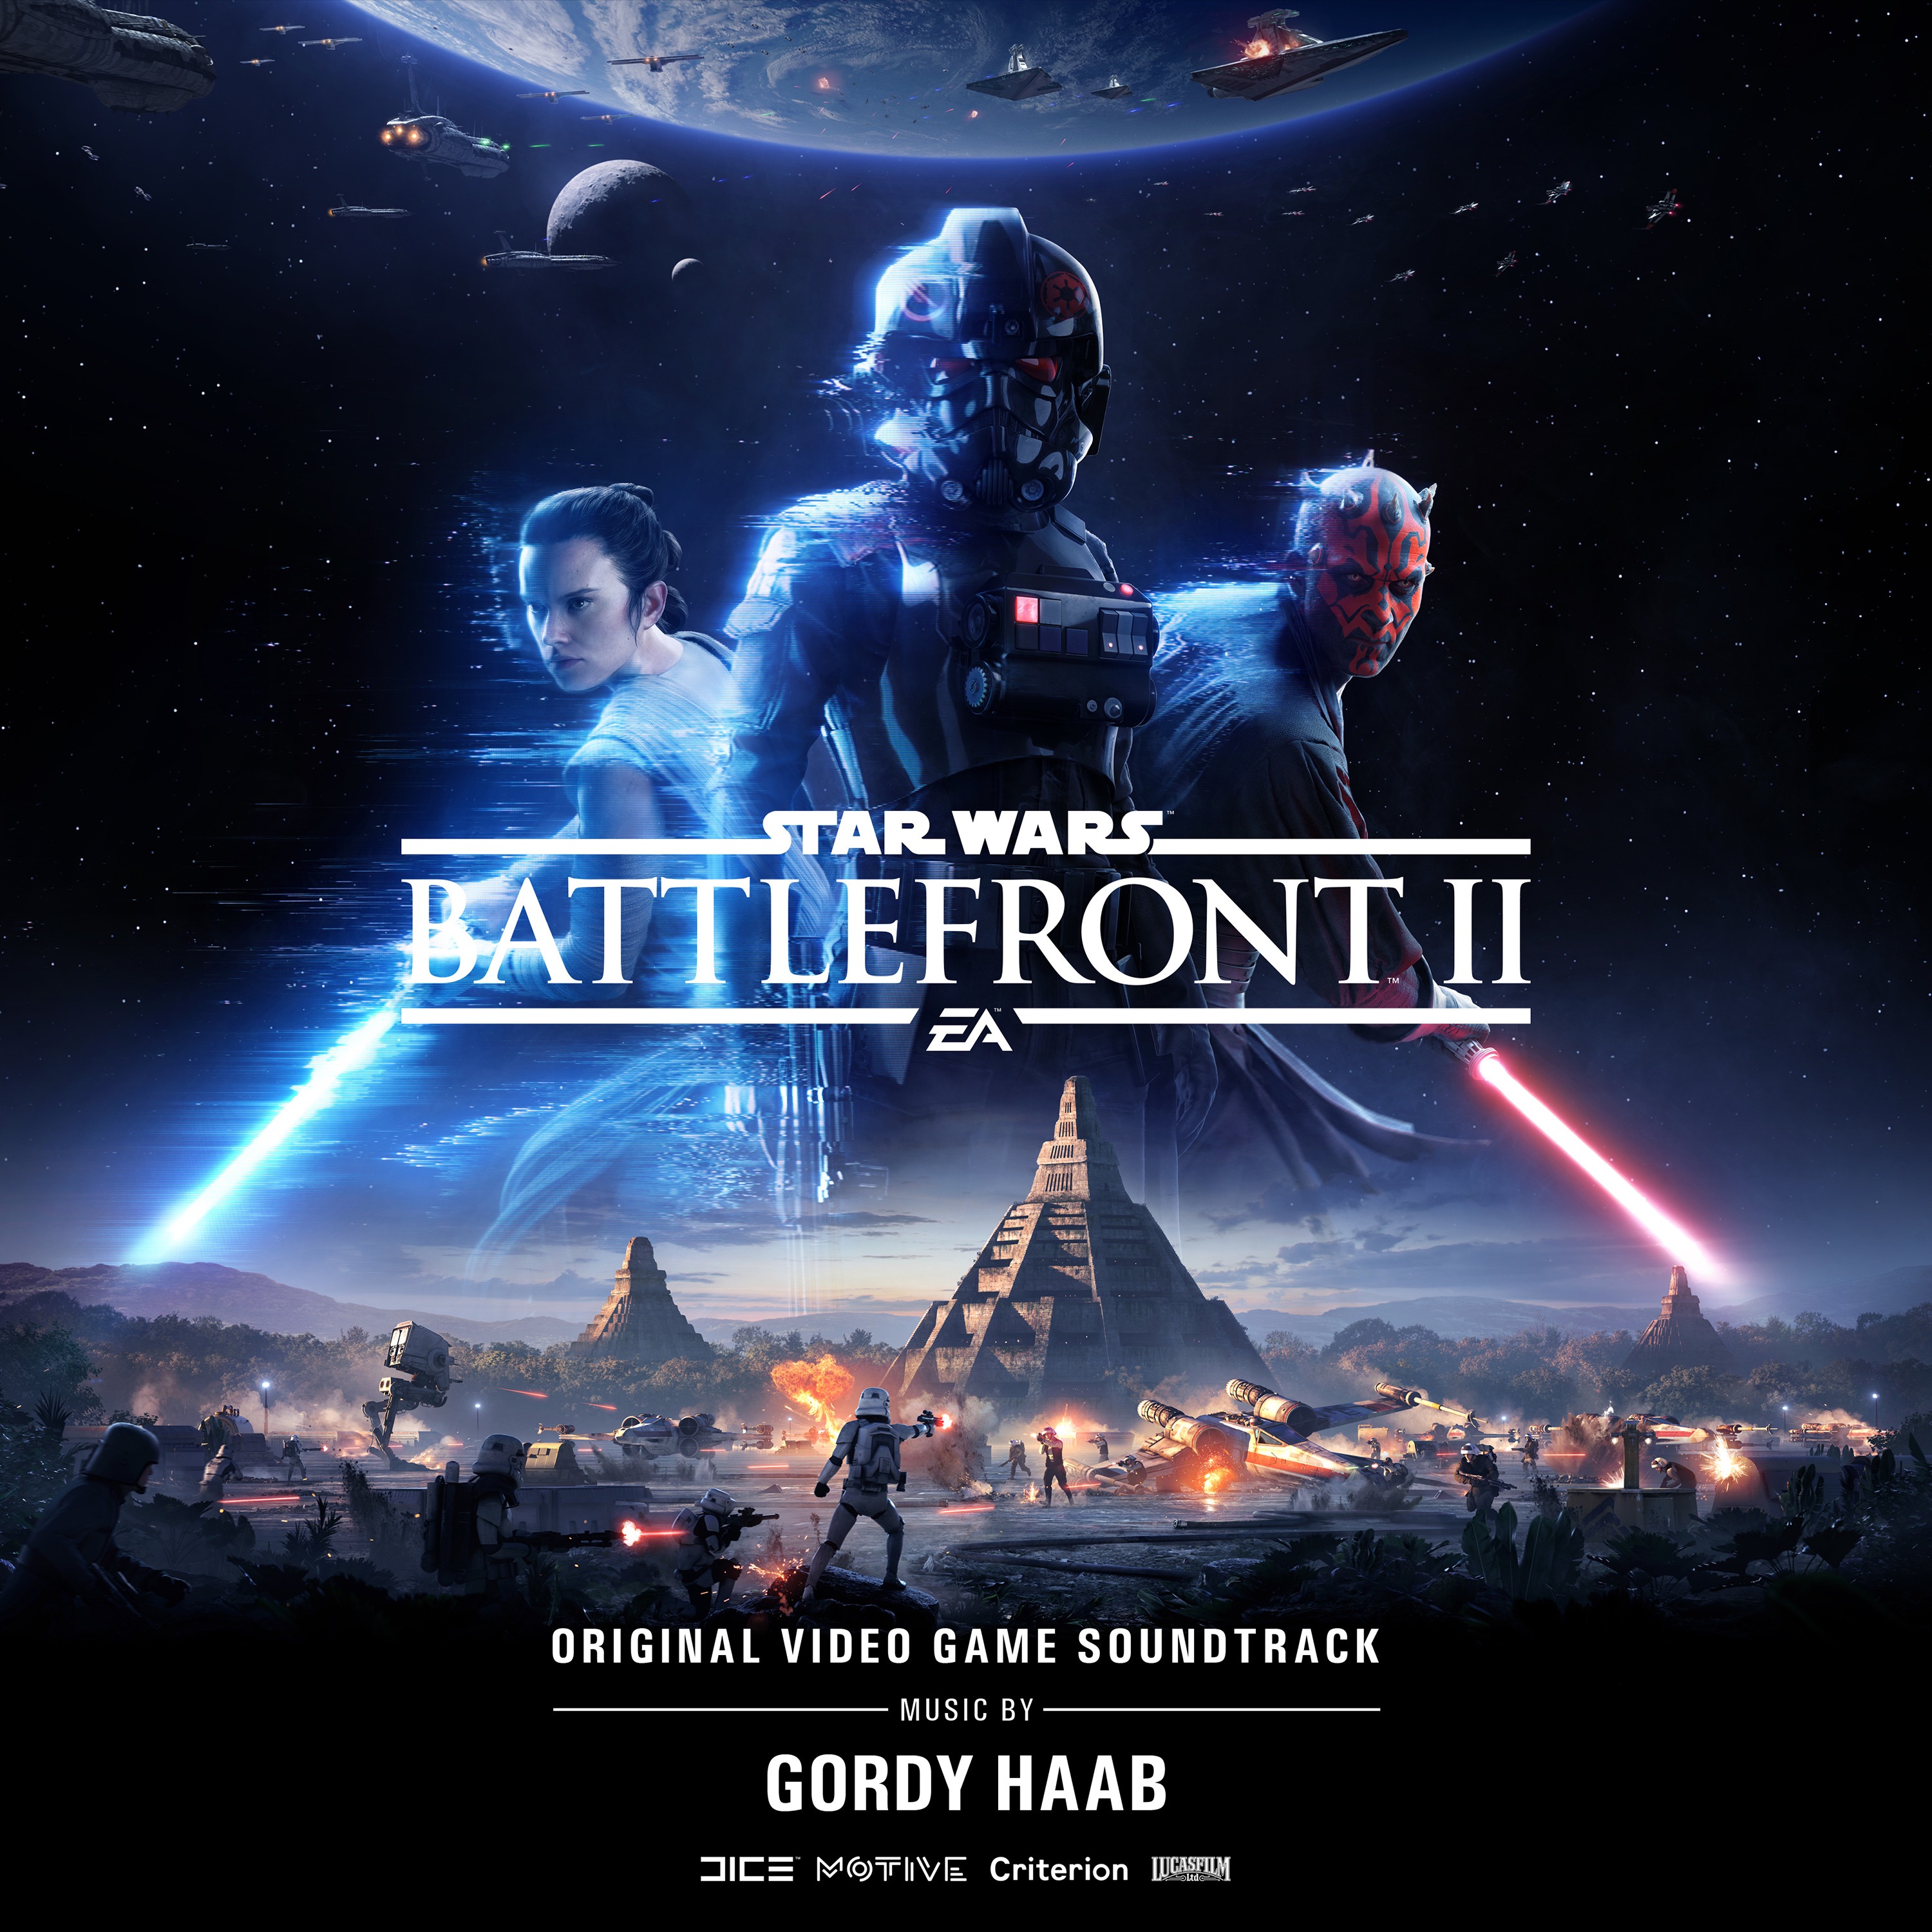 Battlefront 2 ps4. Стар ВАРС батлфронт 2. Star Wars Battlefront II 2к. Star Wars Battlefront II Xbox.